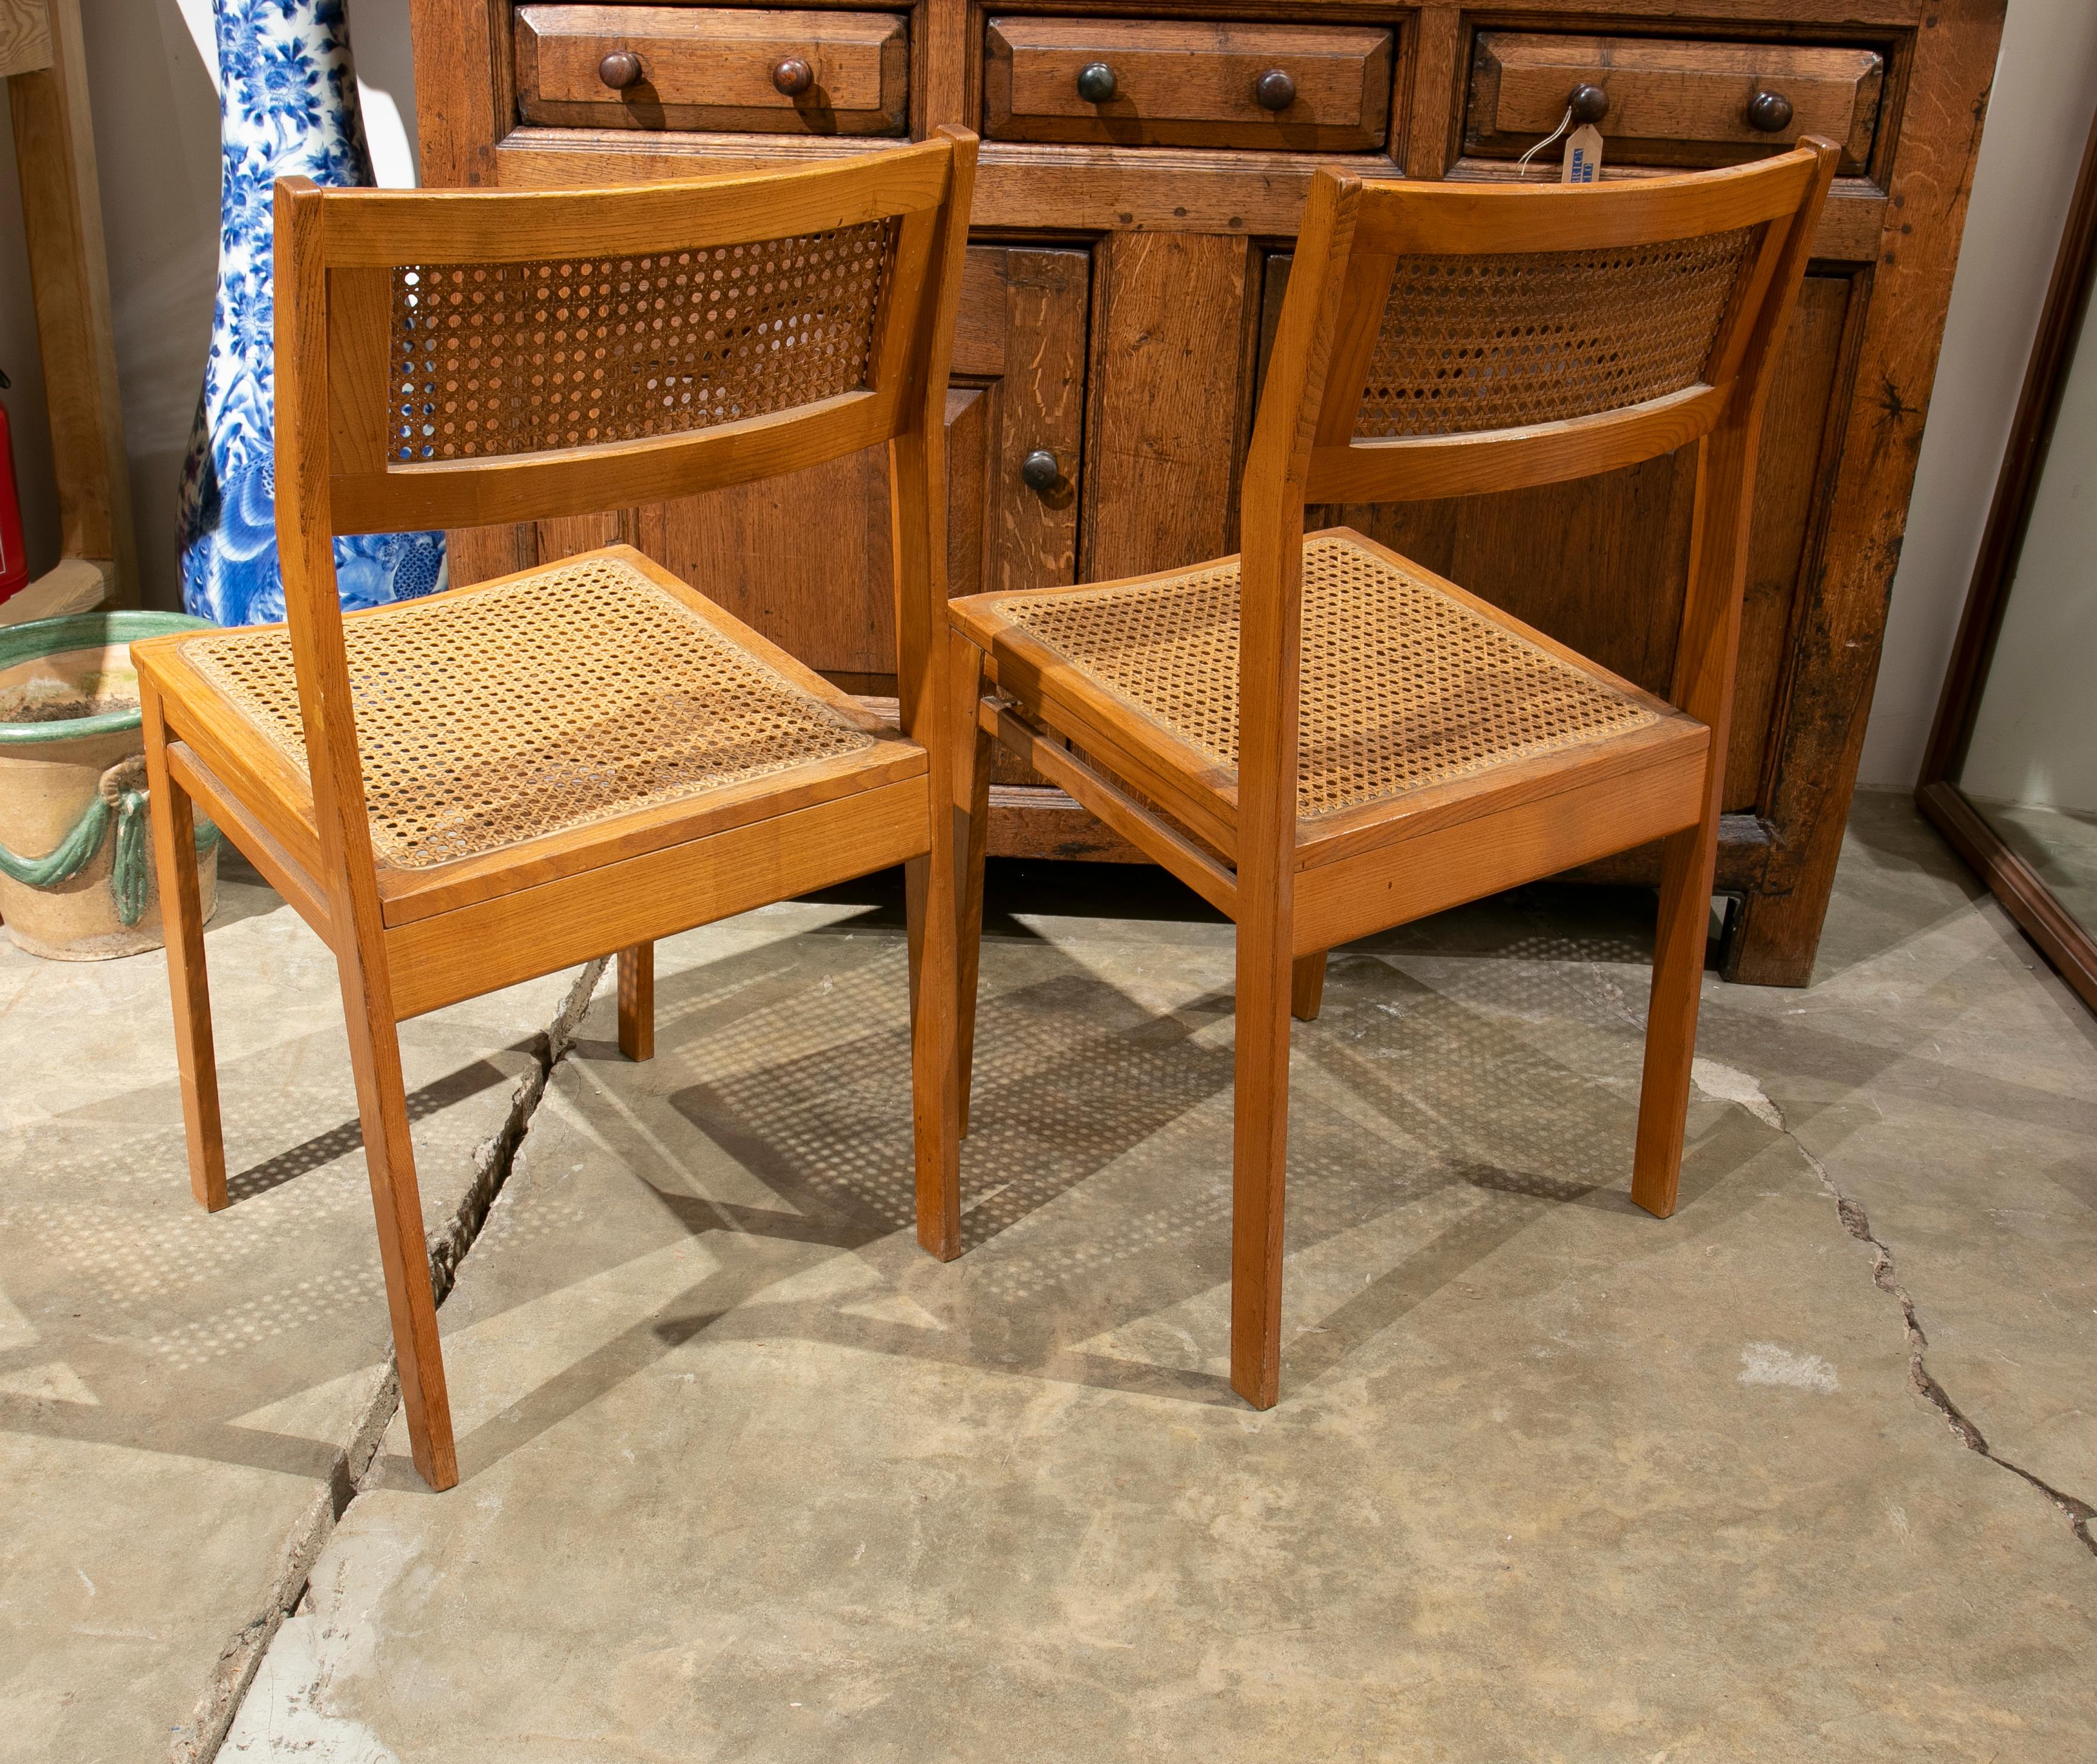 20th Century 1970s Swedish Pair of Wooden Chairs with Wicker Seat and Back For Sale